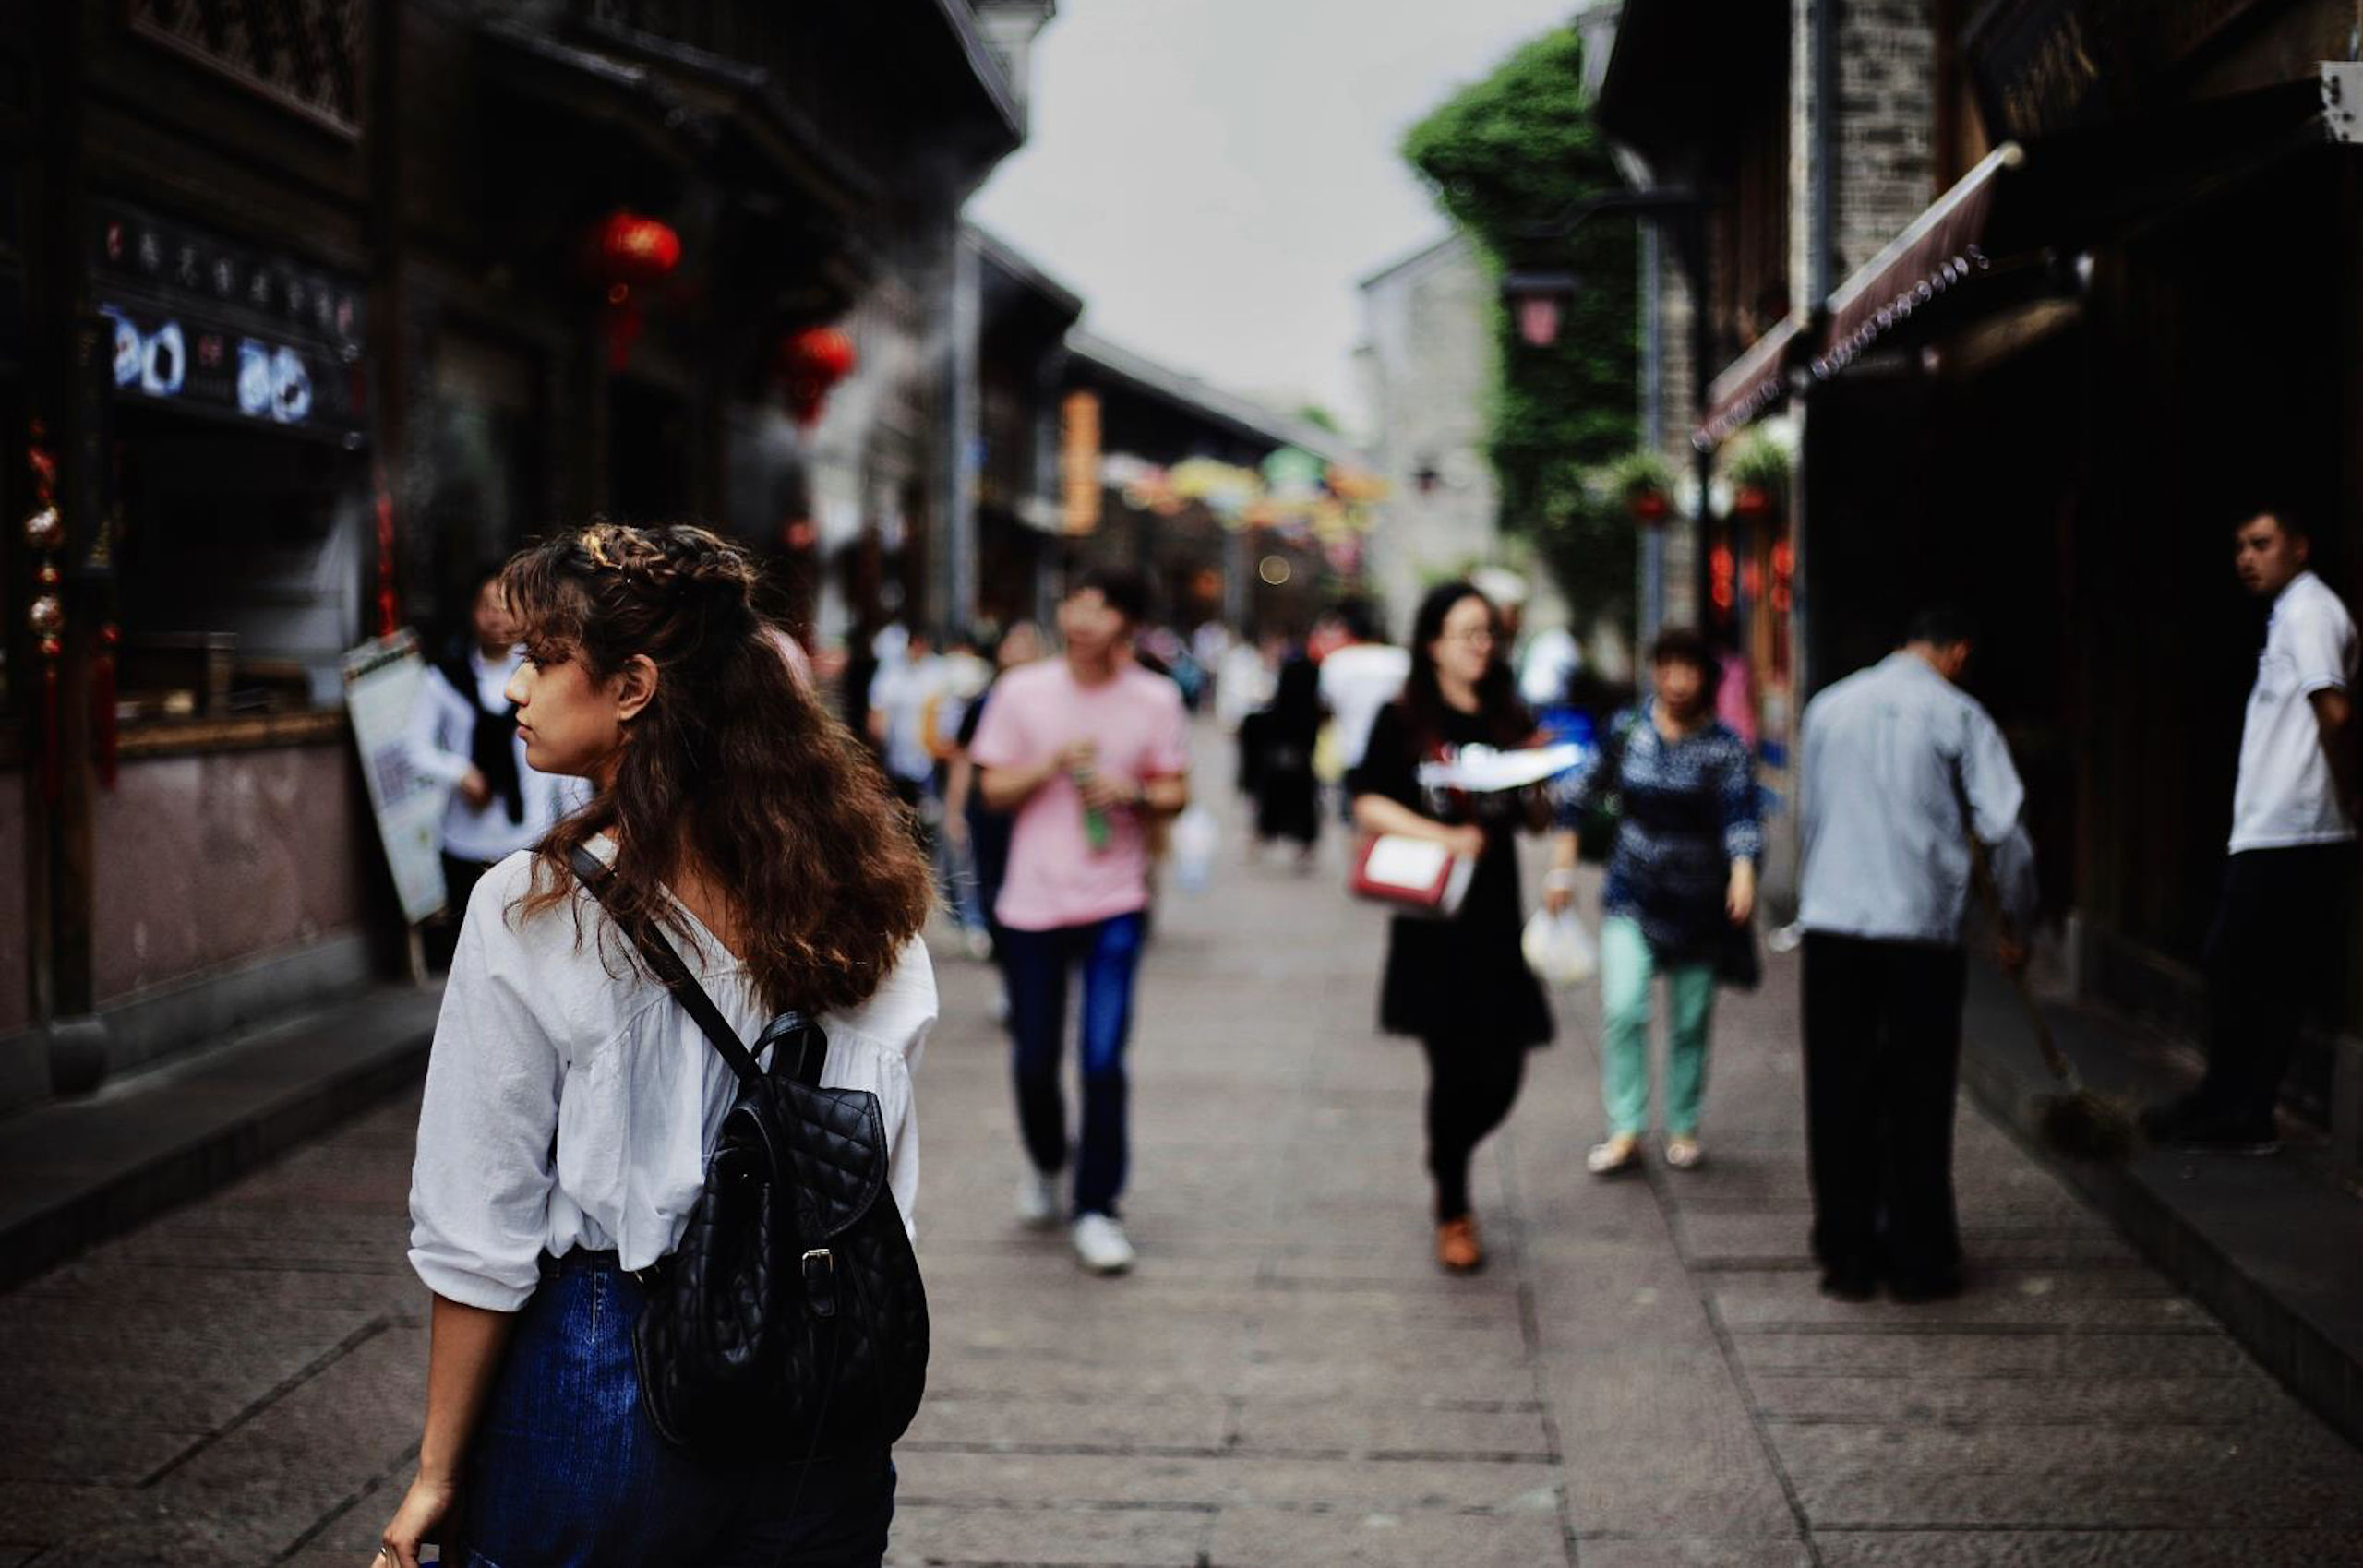 People walk down an old-style narrow shopping street in an Asian city